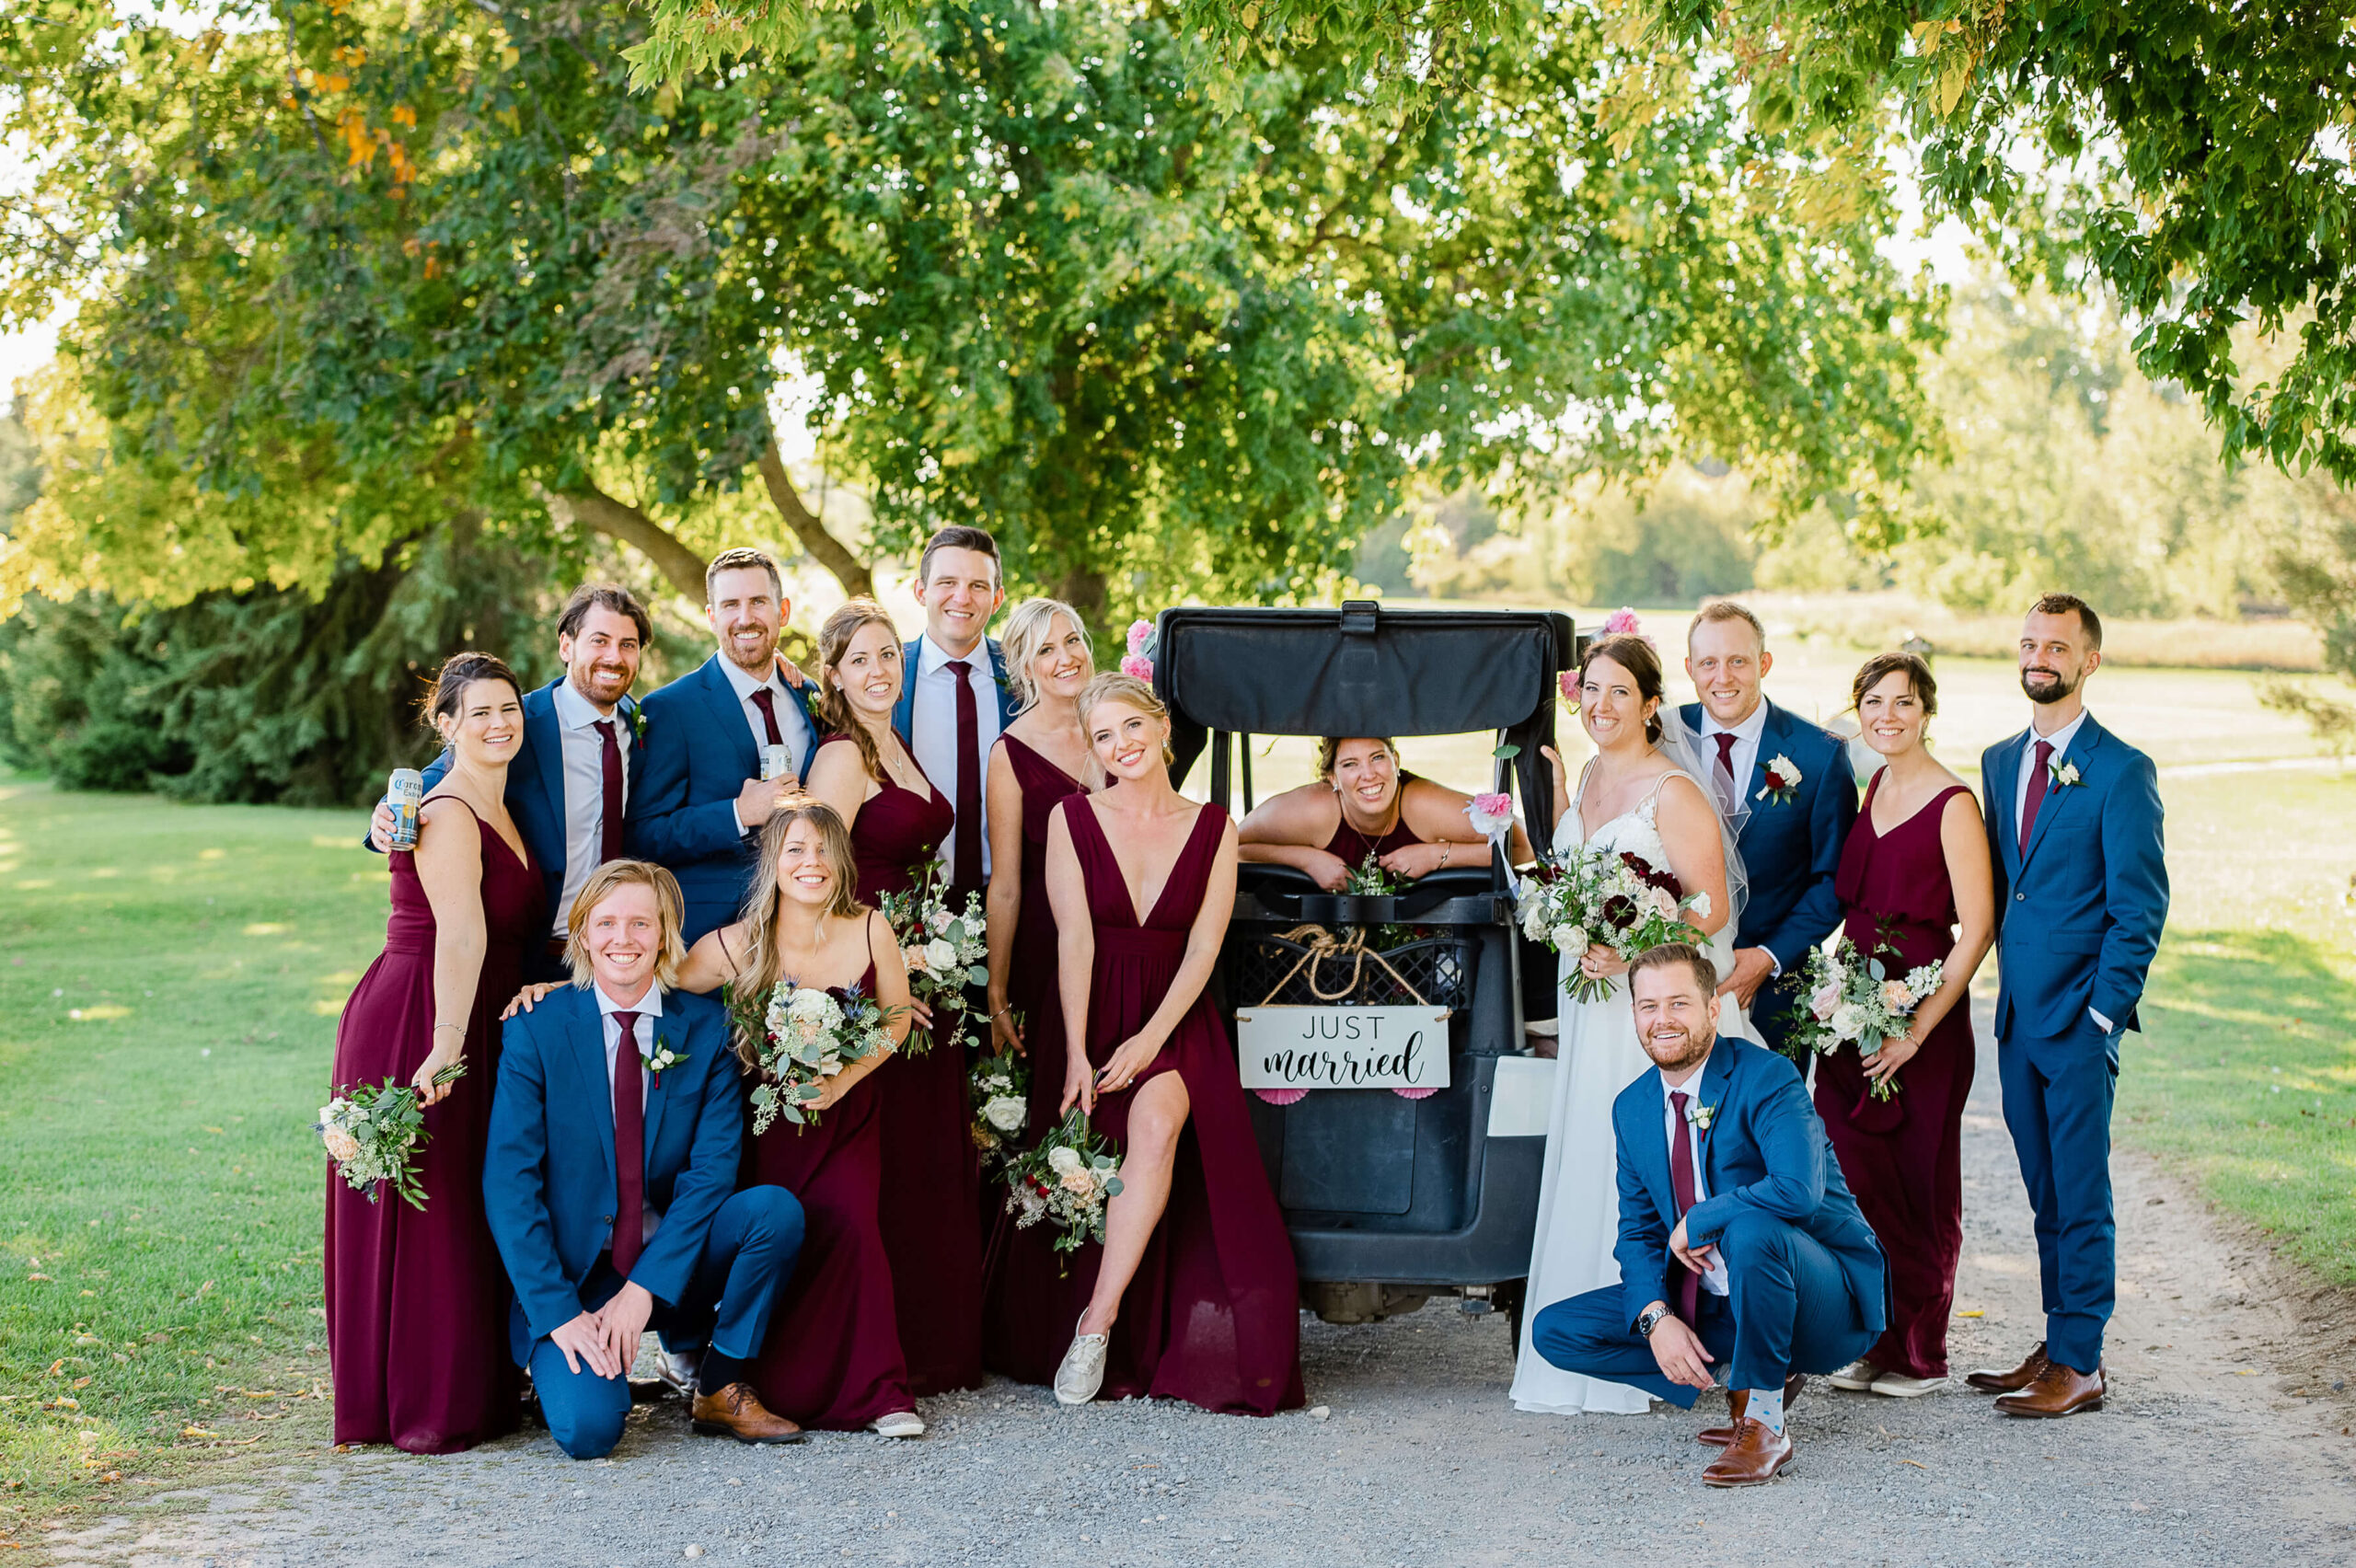 a bride ang groom with their bridesmaids in burgundy and their groomsmen in blue suits around a golf cart. Wedding organized by Opportunity Knocks Events